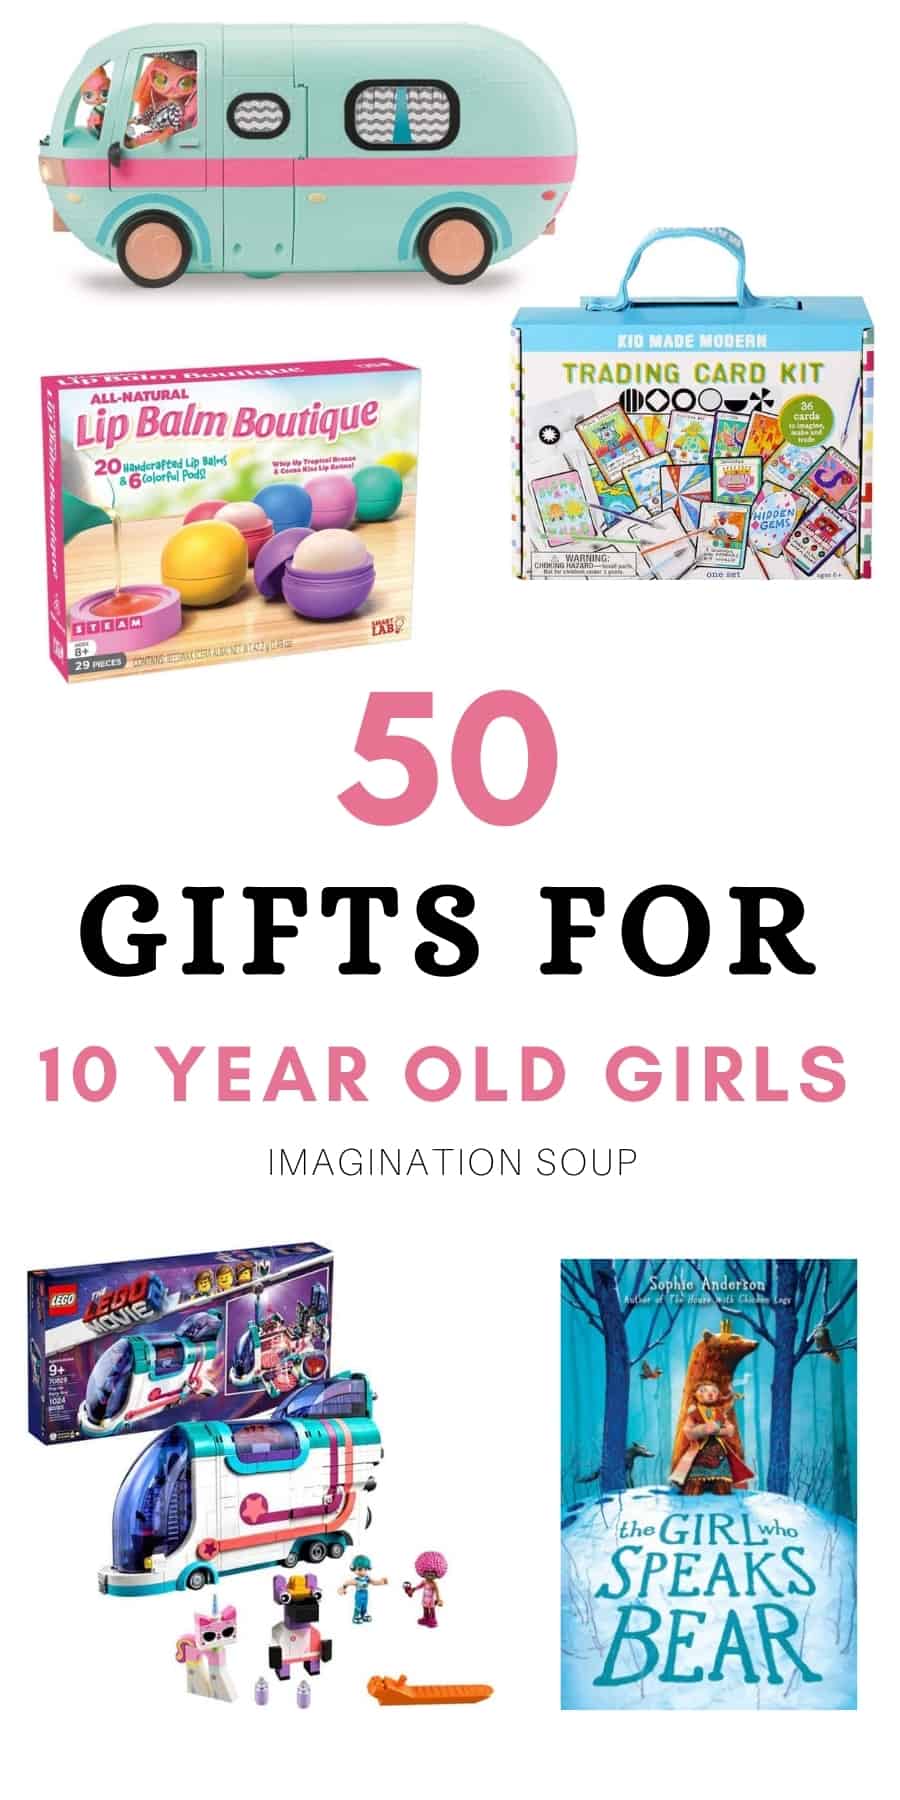 Gifts For 10 Year Old Girls Imagination Soup - 6 year old simulator roblox